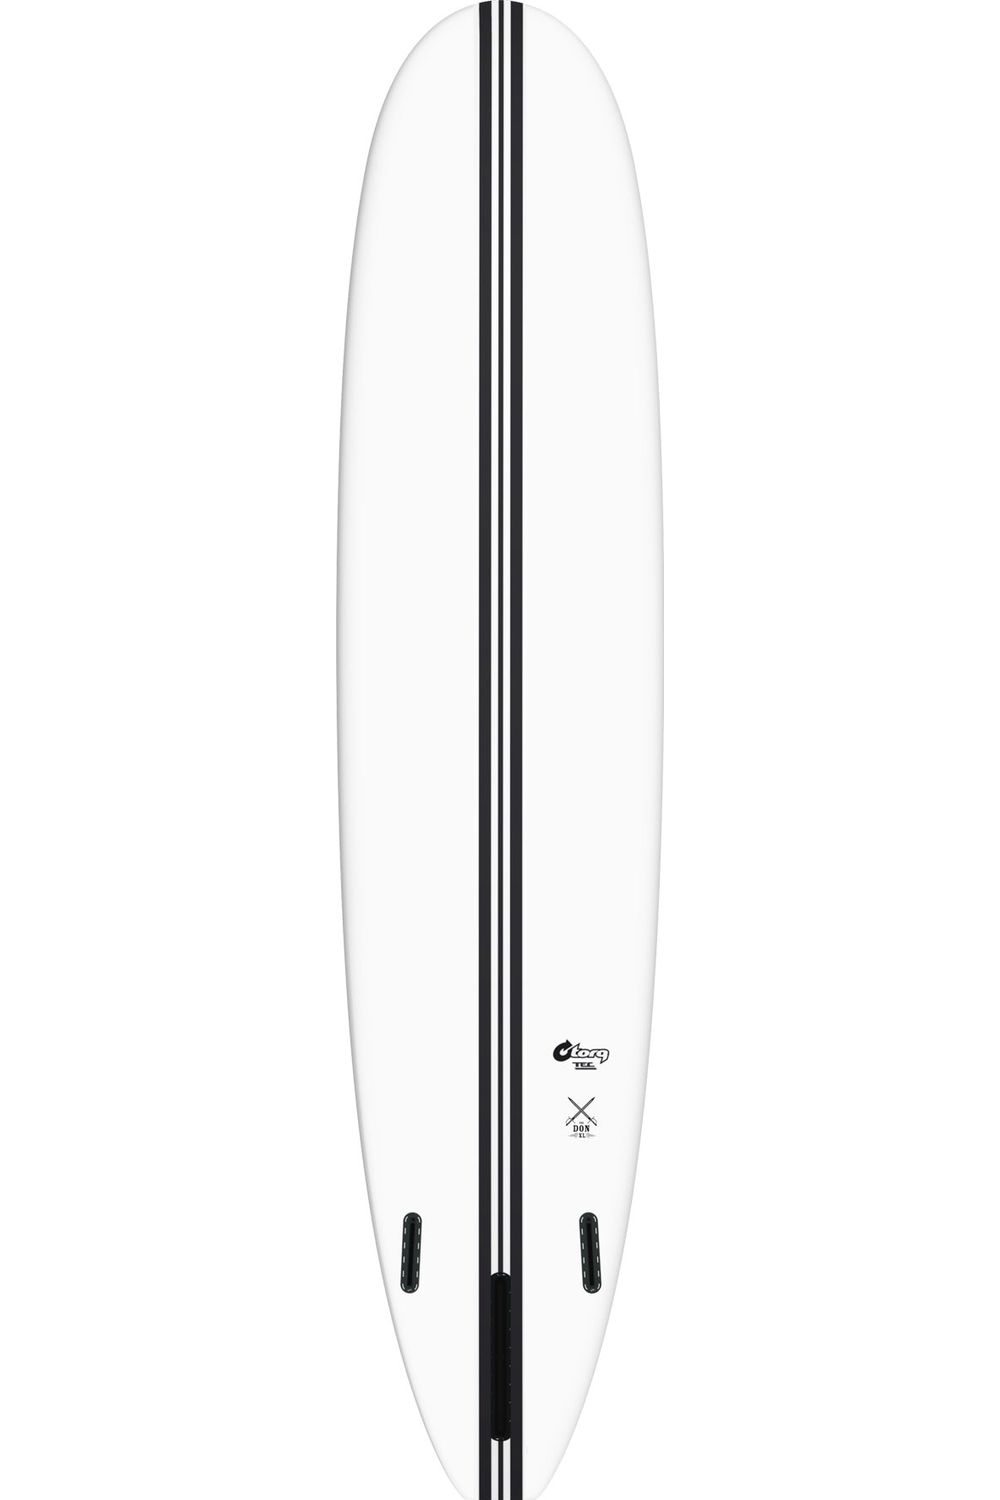 Torq TEC The Don XL Surfboard in White